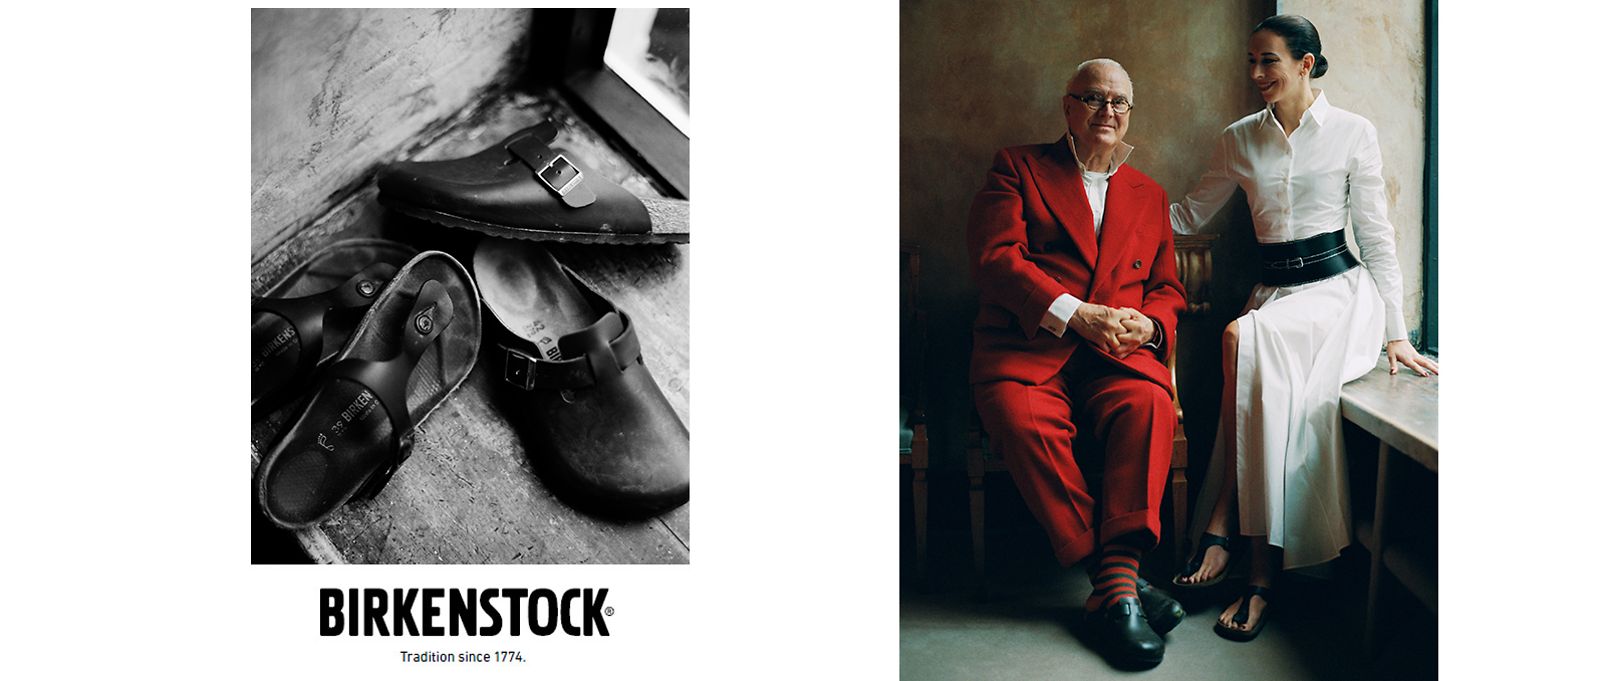 stens shoes campaign ad 1 - Square Elephant Productions